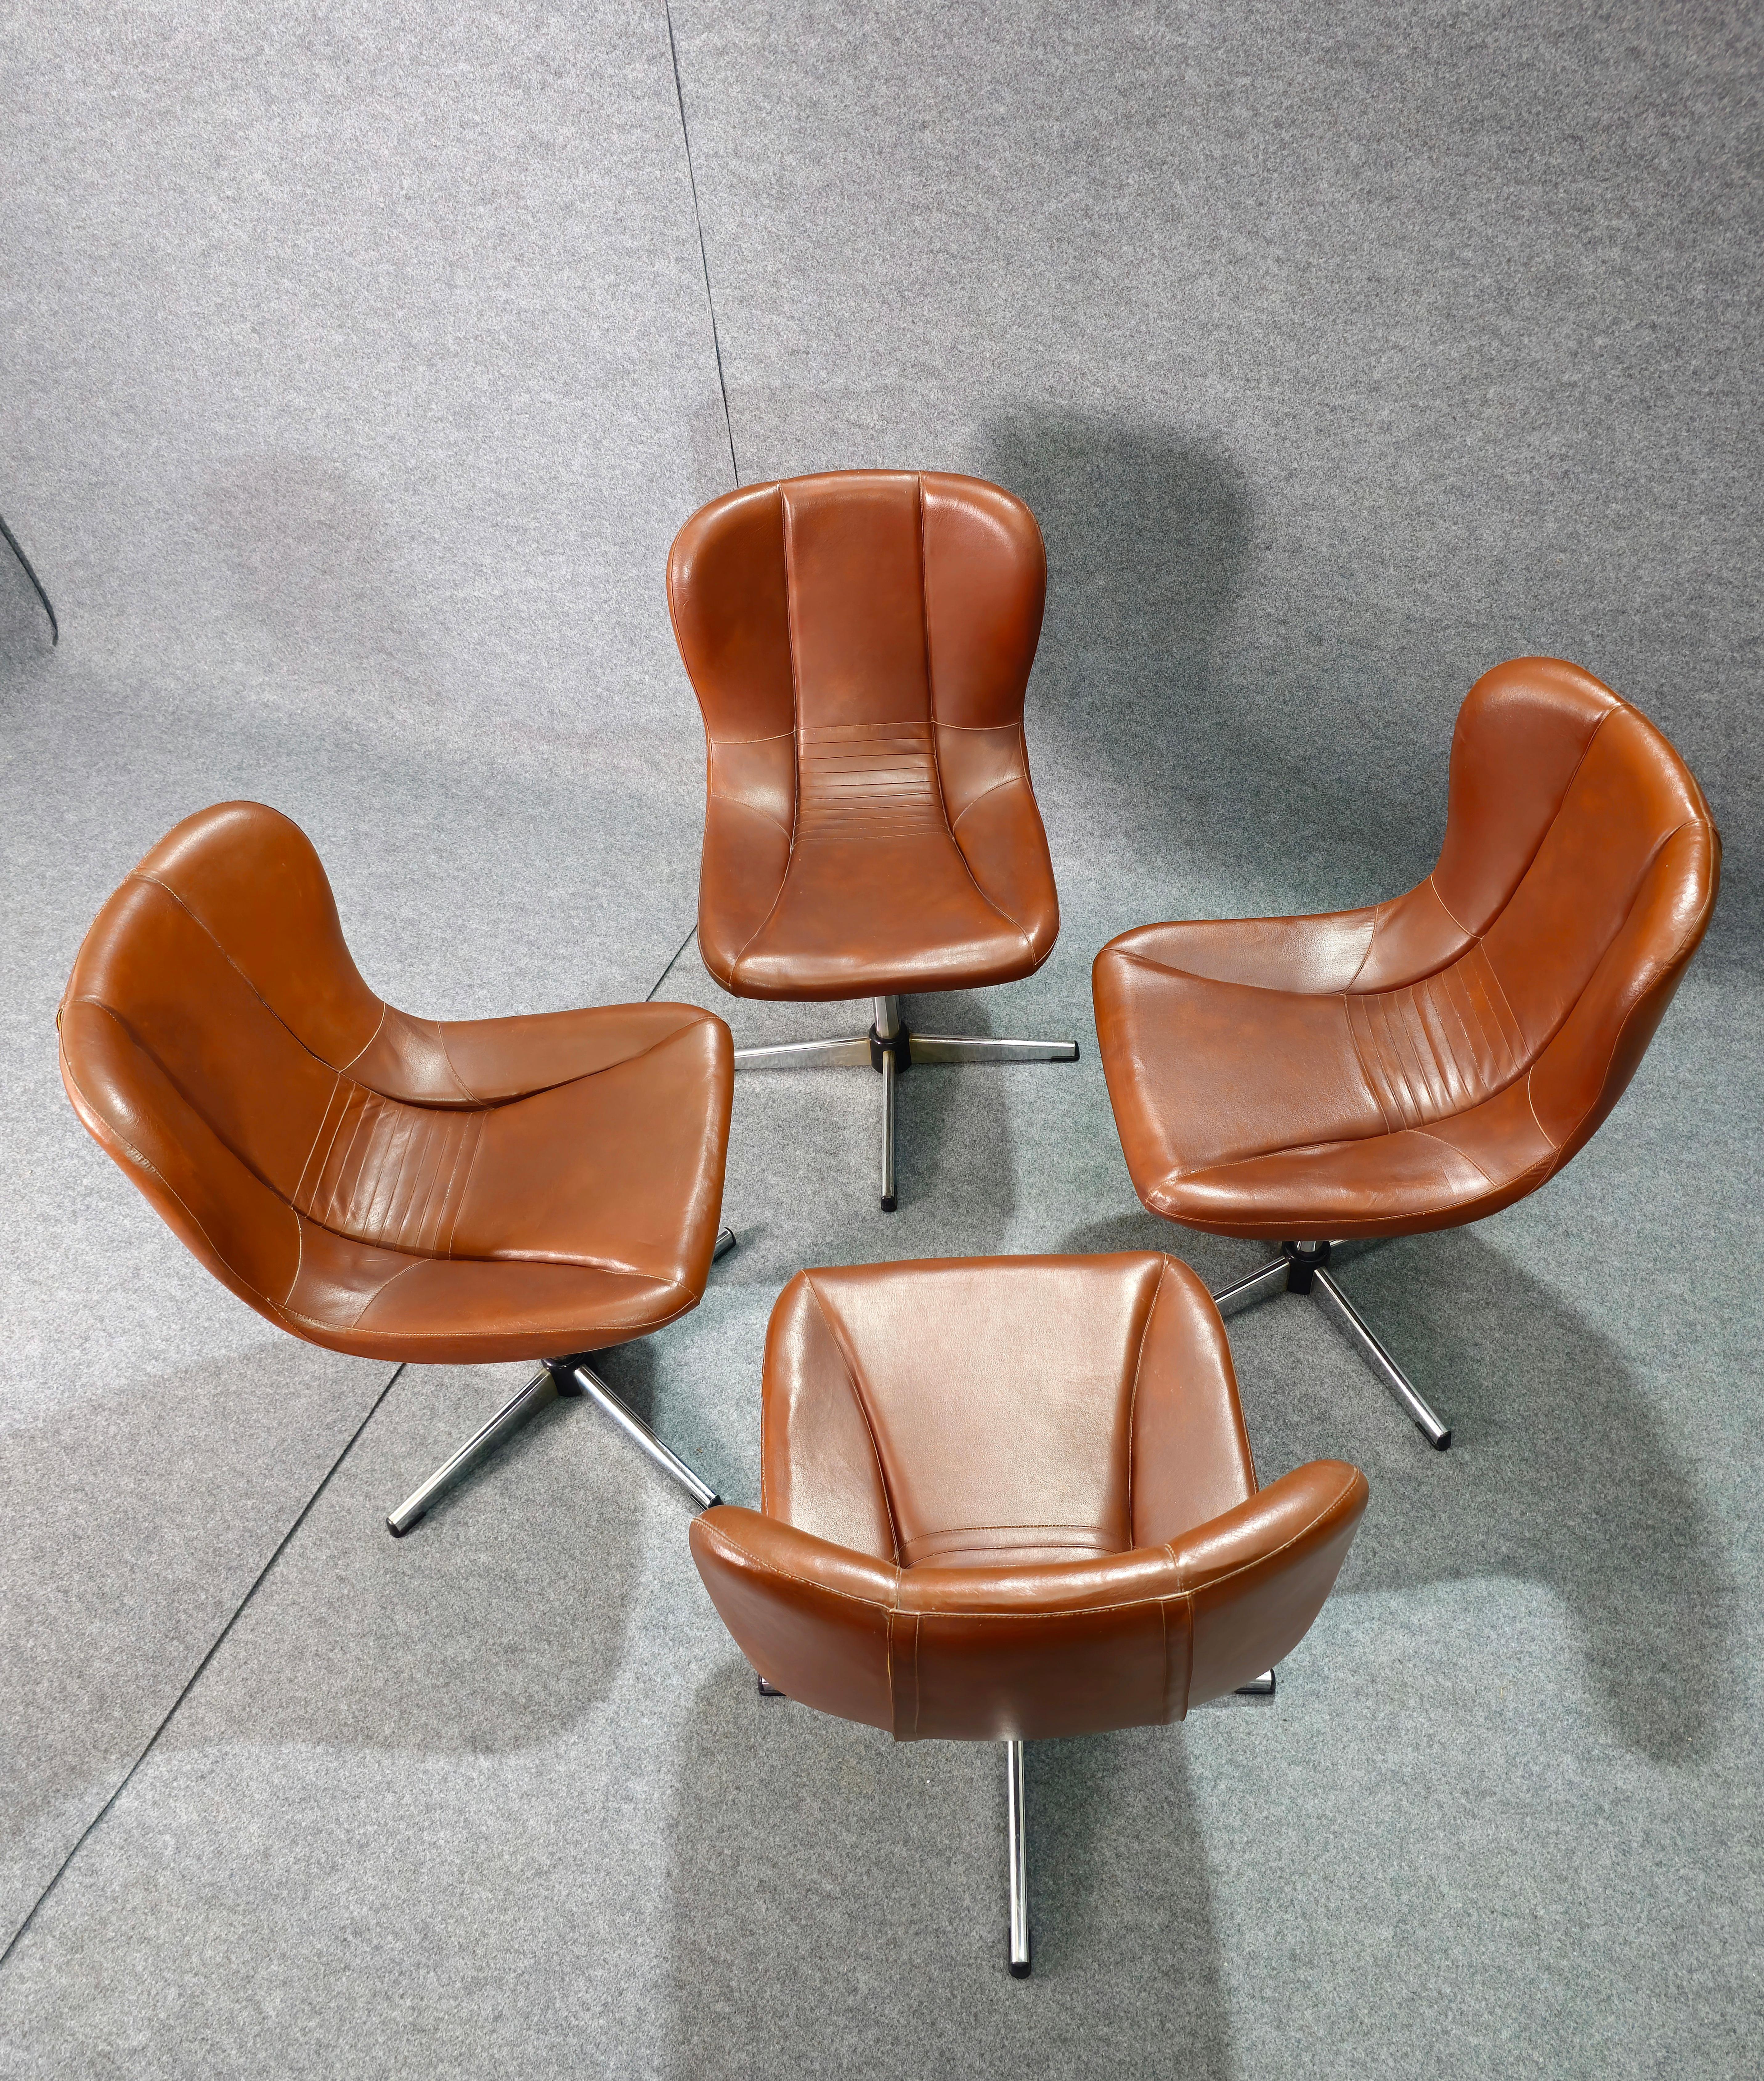 20th Century Armchairs Chairs Swivel Leather Metal Wood Midcentury Modern Italy 1960 Set of 4